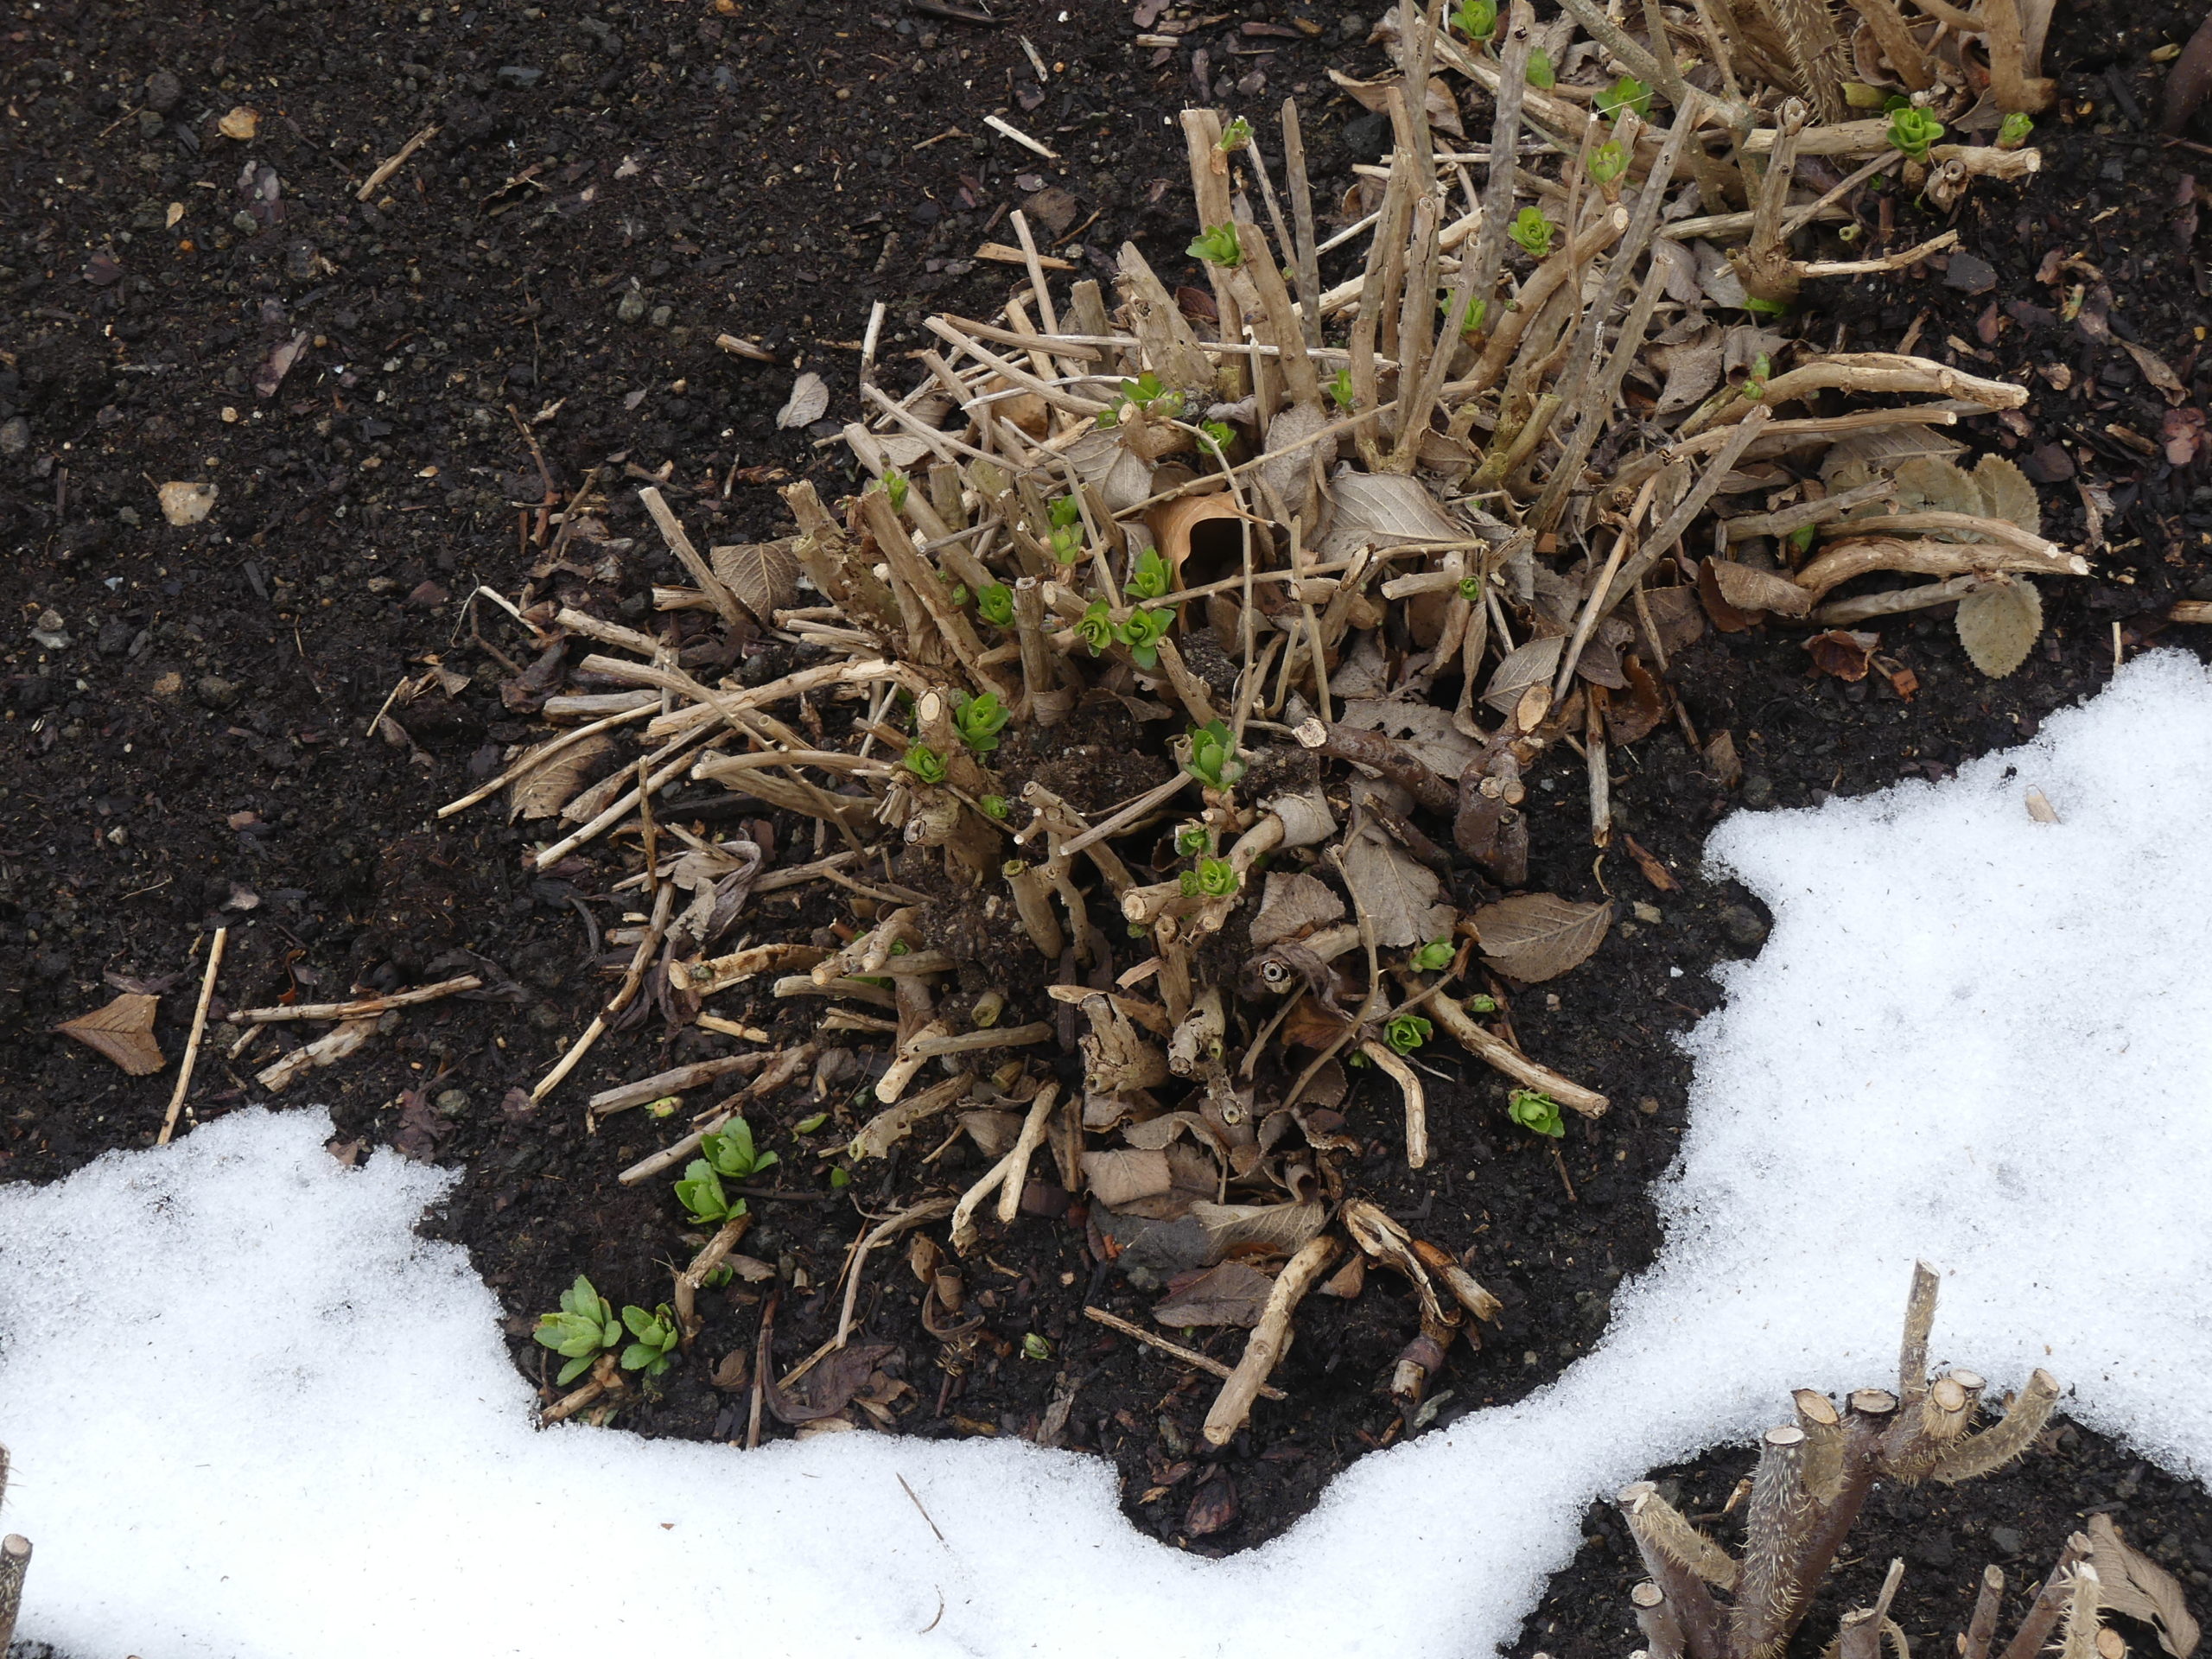 As the February snow melts, some new shoots are revealed from this decade-old Montauk daisy. The shrubby perennial was cut back to this size in late November when blooming was done and the cold had set in.